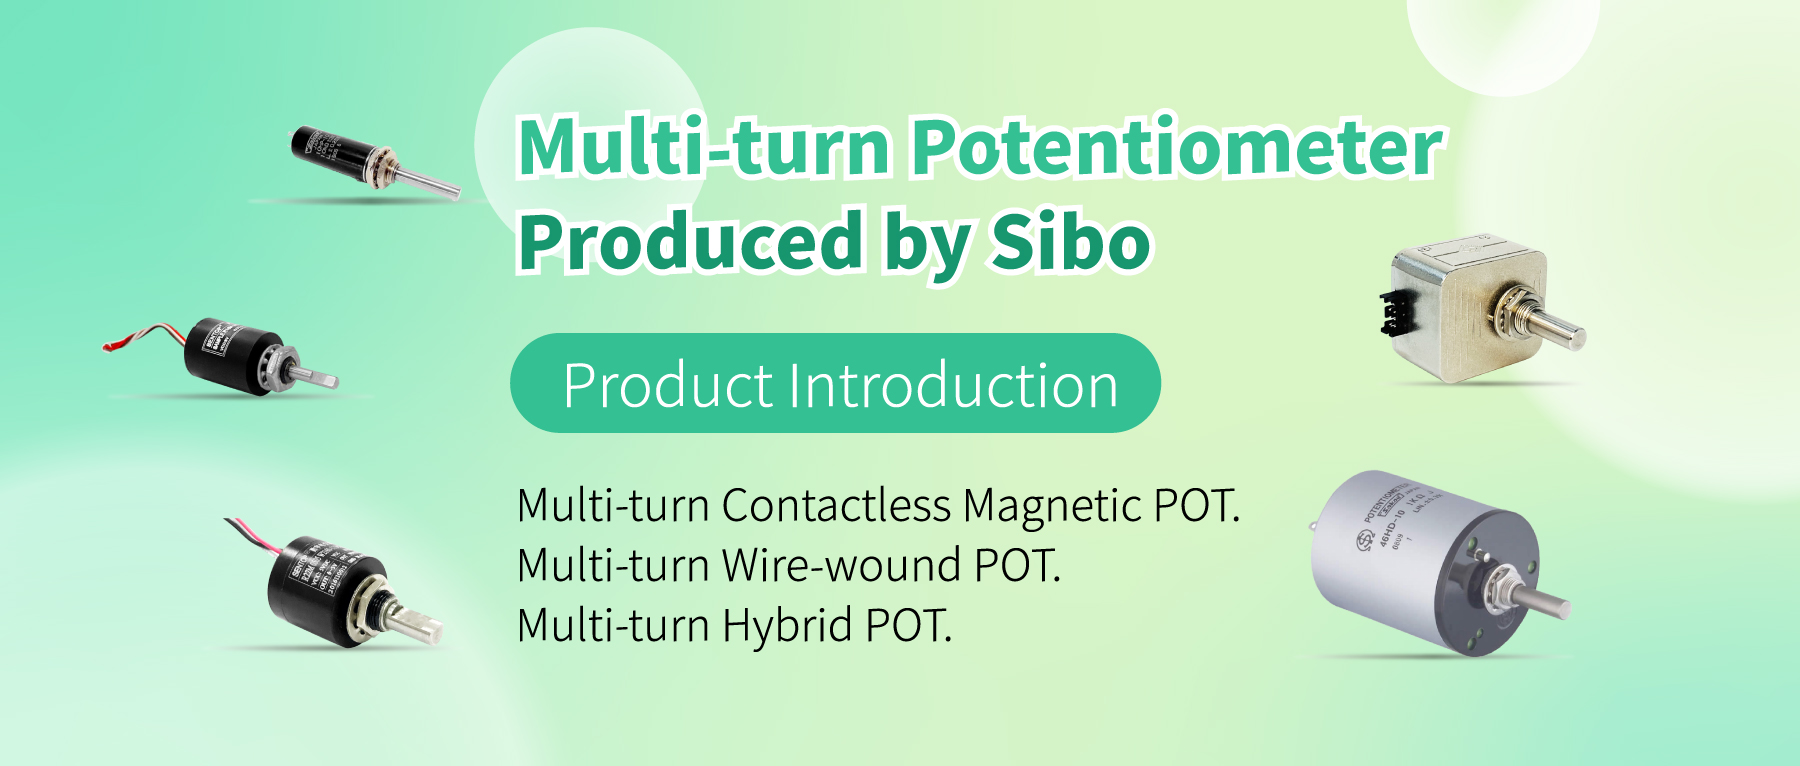 Sibo multi-turn potentiometers: precise and reliable, outstanding performance